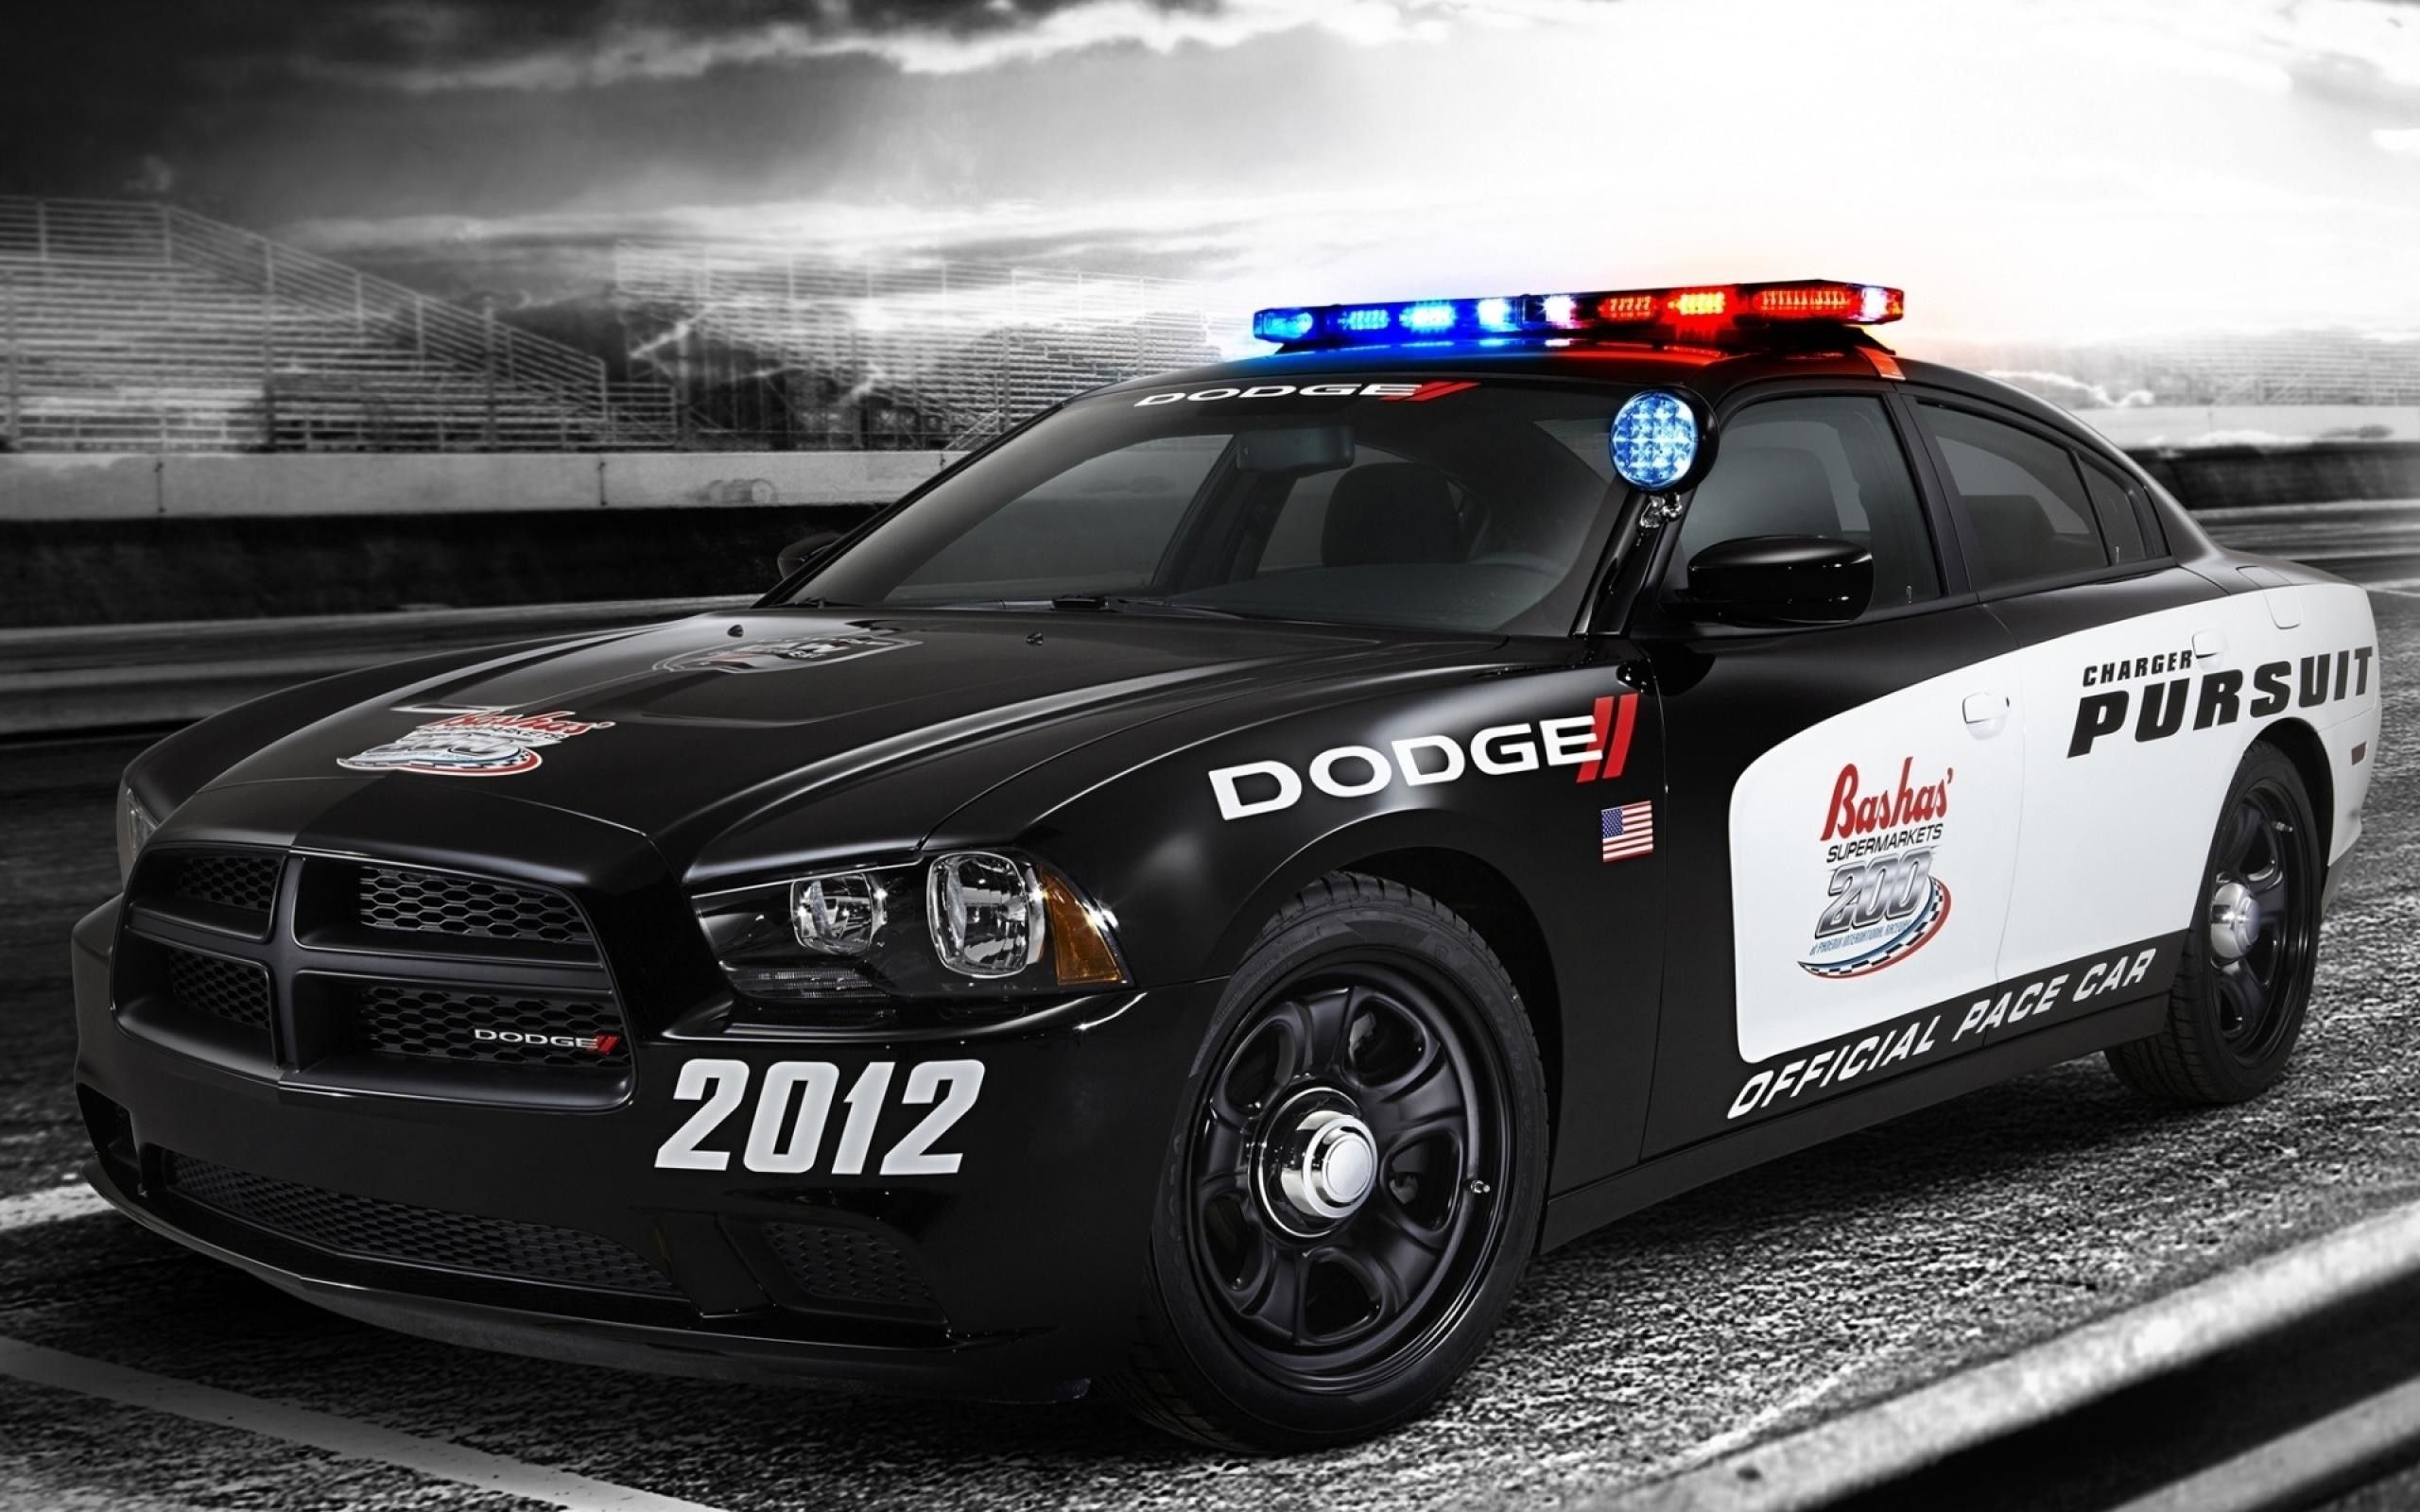 Cool Police Wallpapers